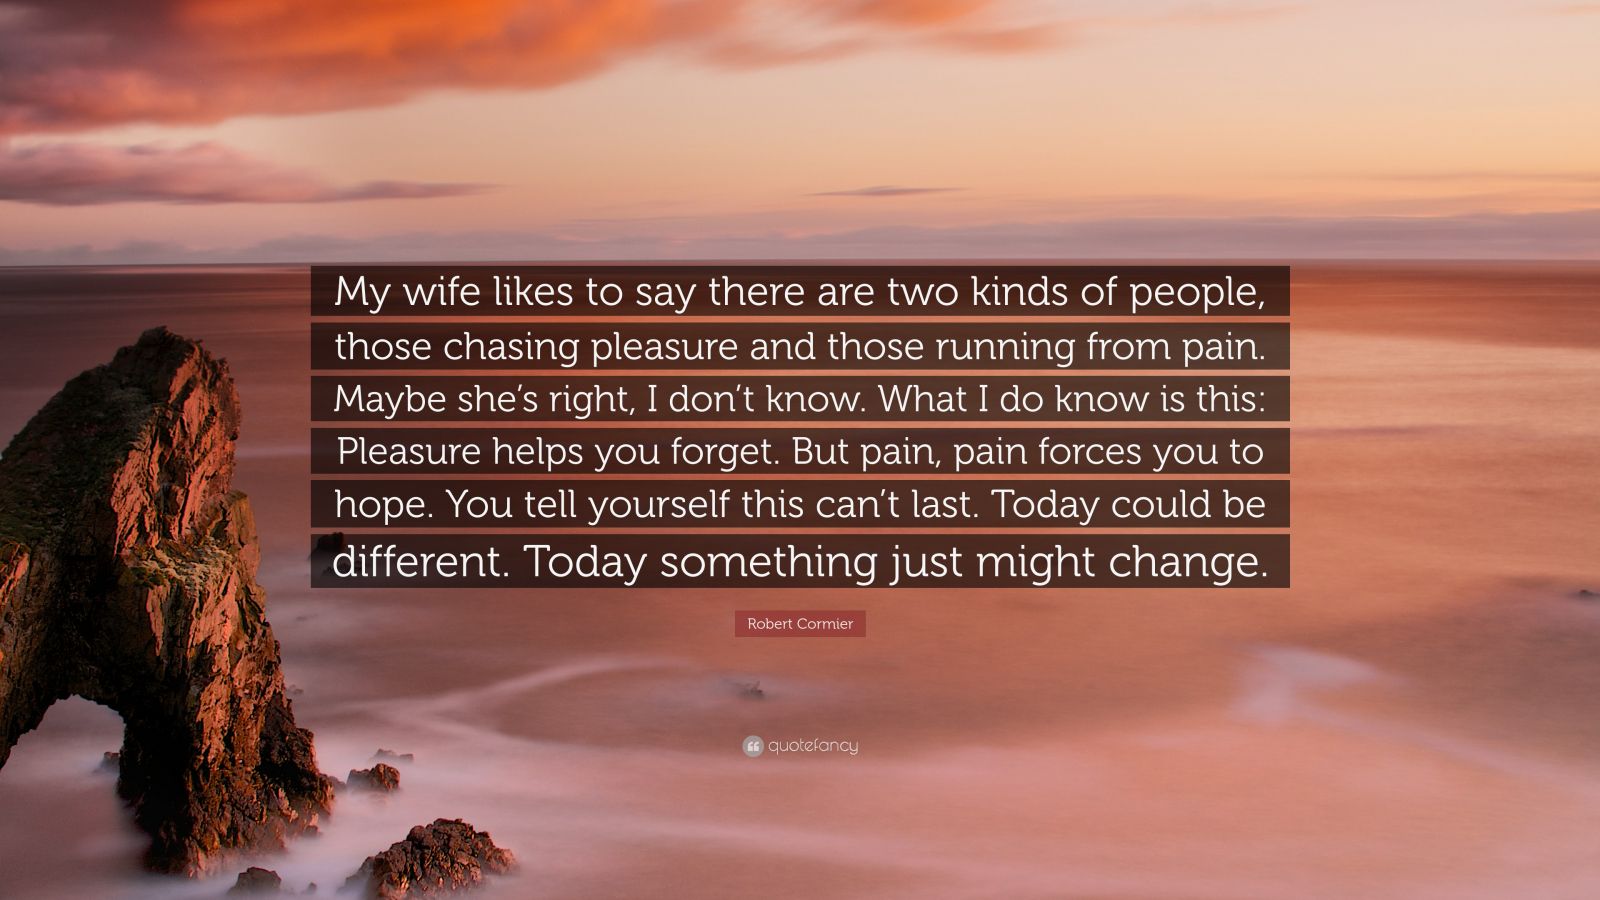 Robert Cormier Quote “My wife likes to